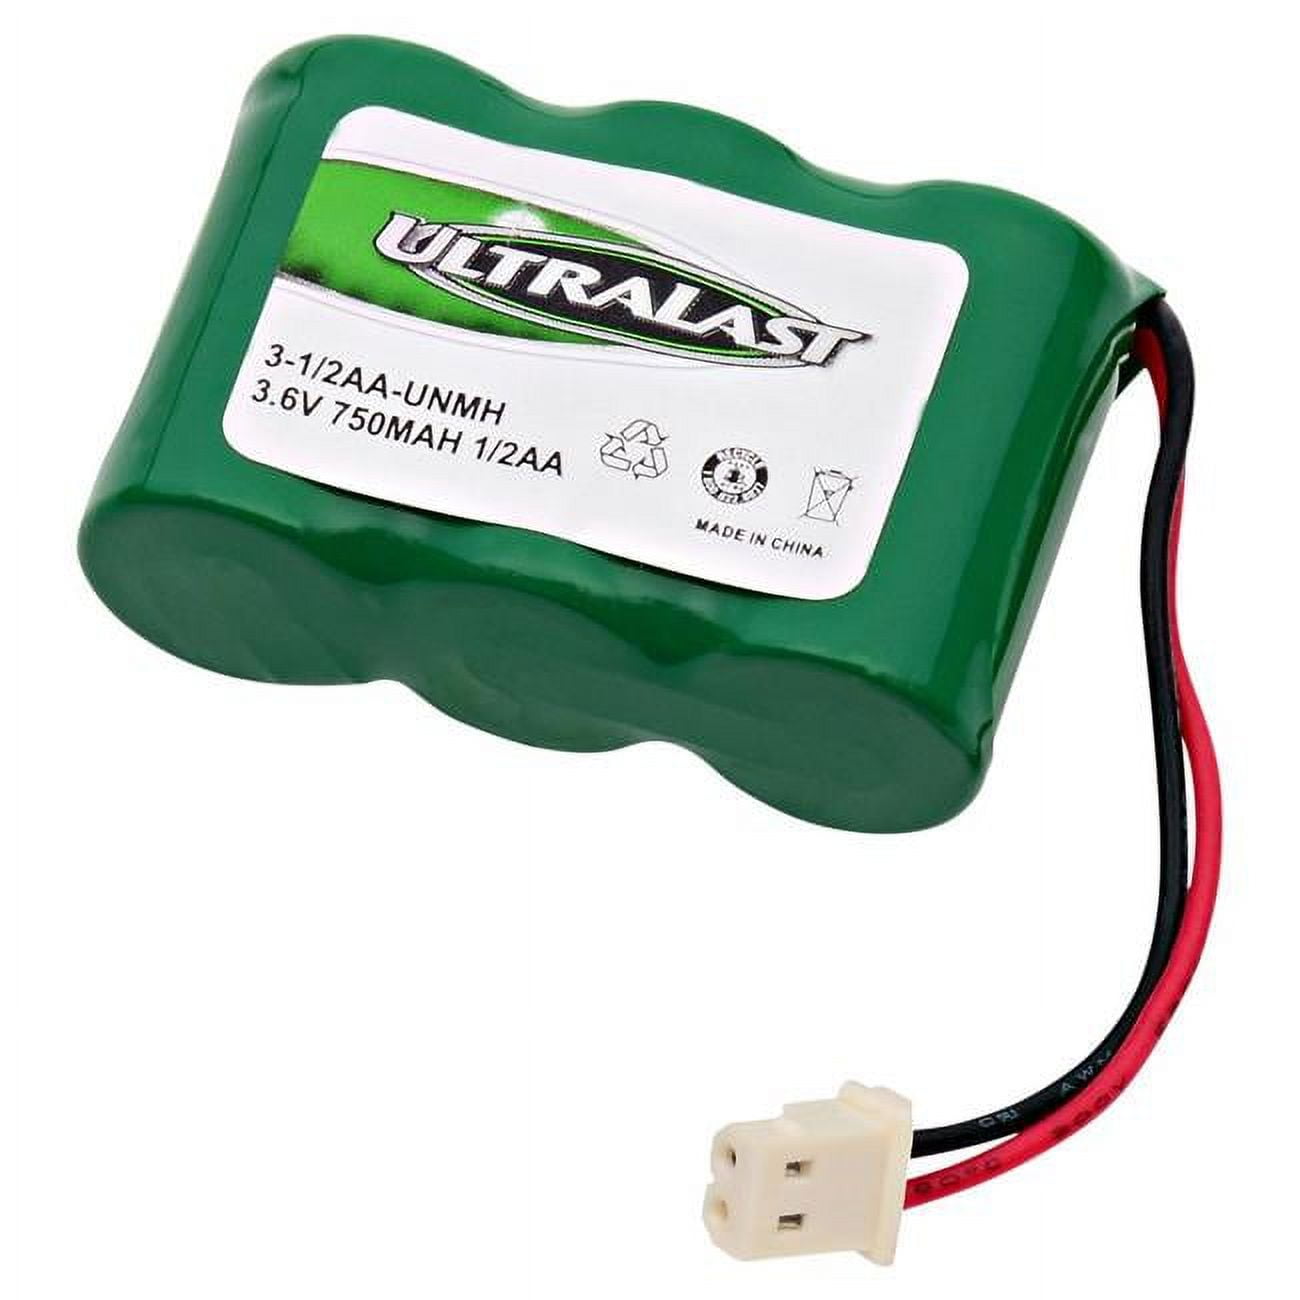 Picture of Ultralast 3-1-2AA-UNMH 3.6V & 600 mAh Replacement Nickel Metal Hydride Battery for AT&T - EL41108 Cordless Phone